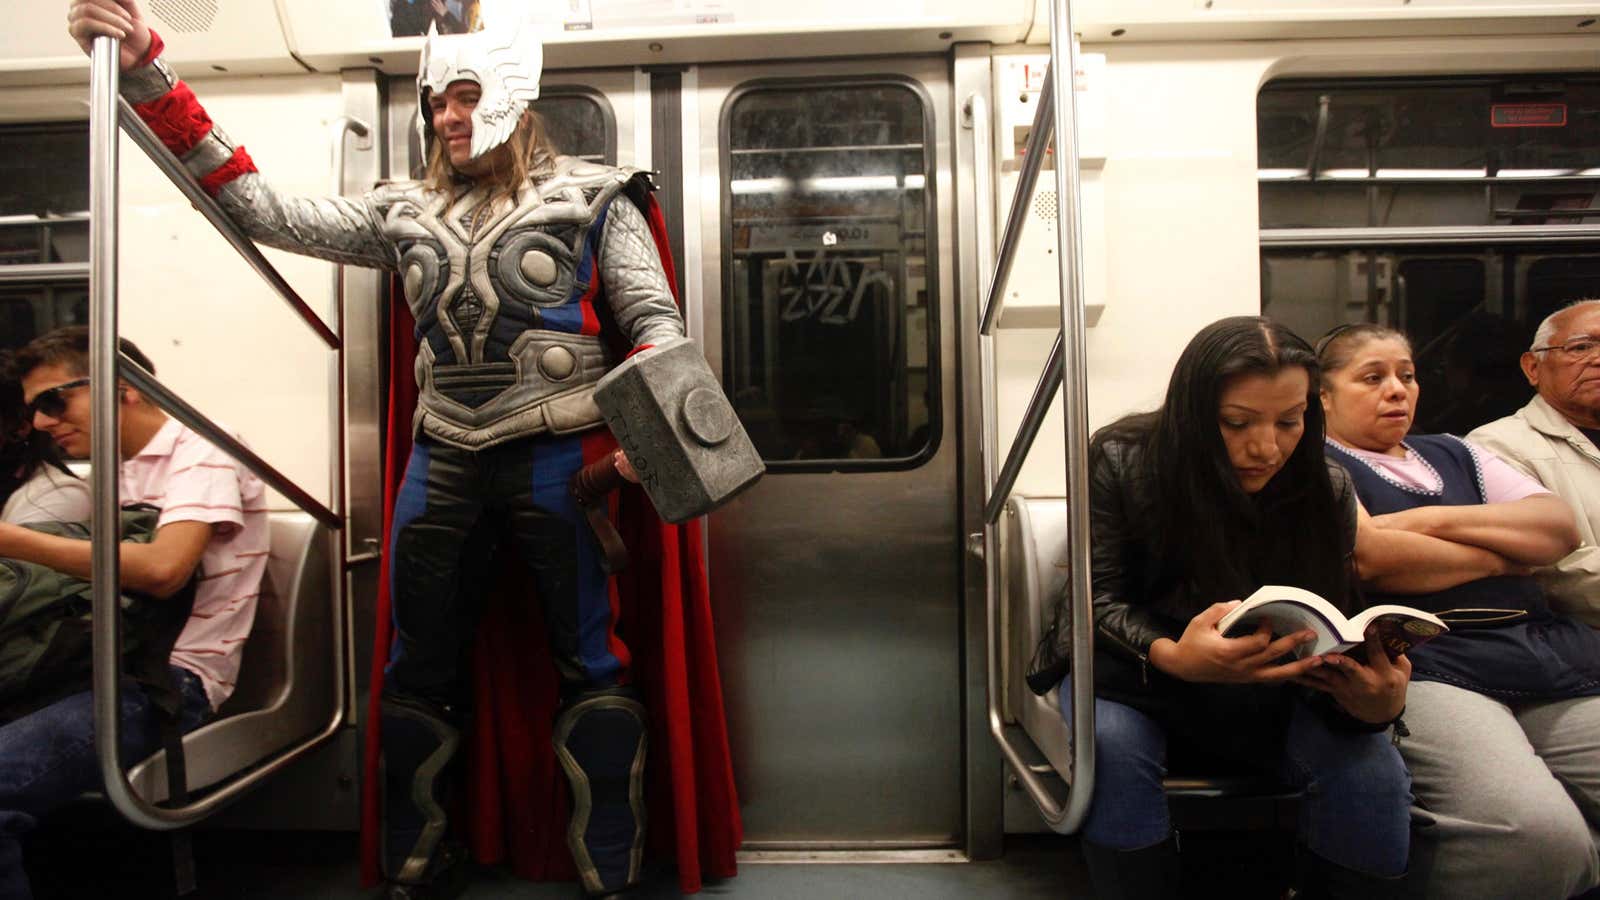 You may not be Thor but you can still be a hero.